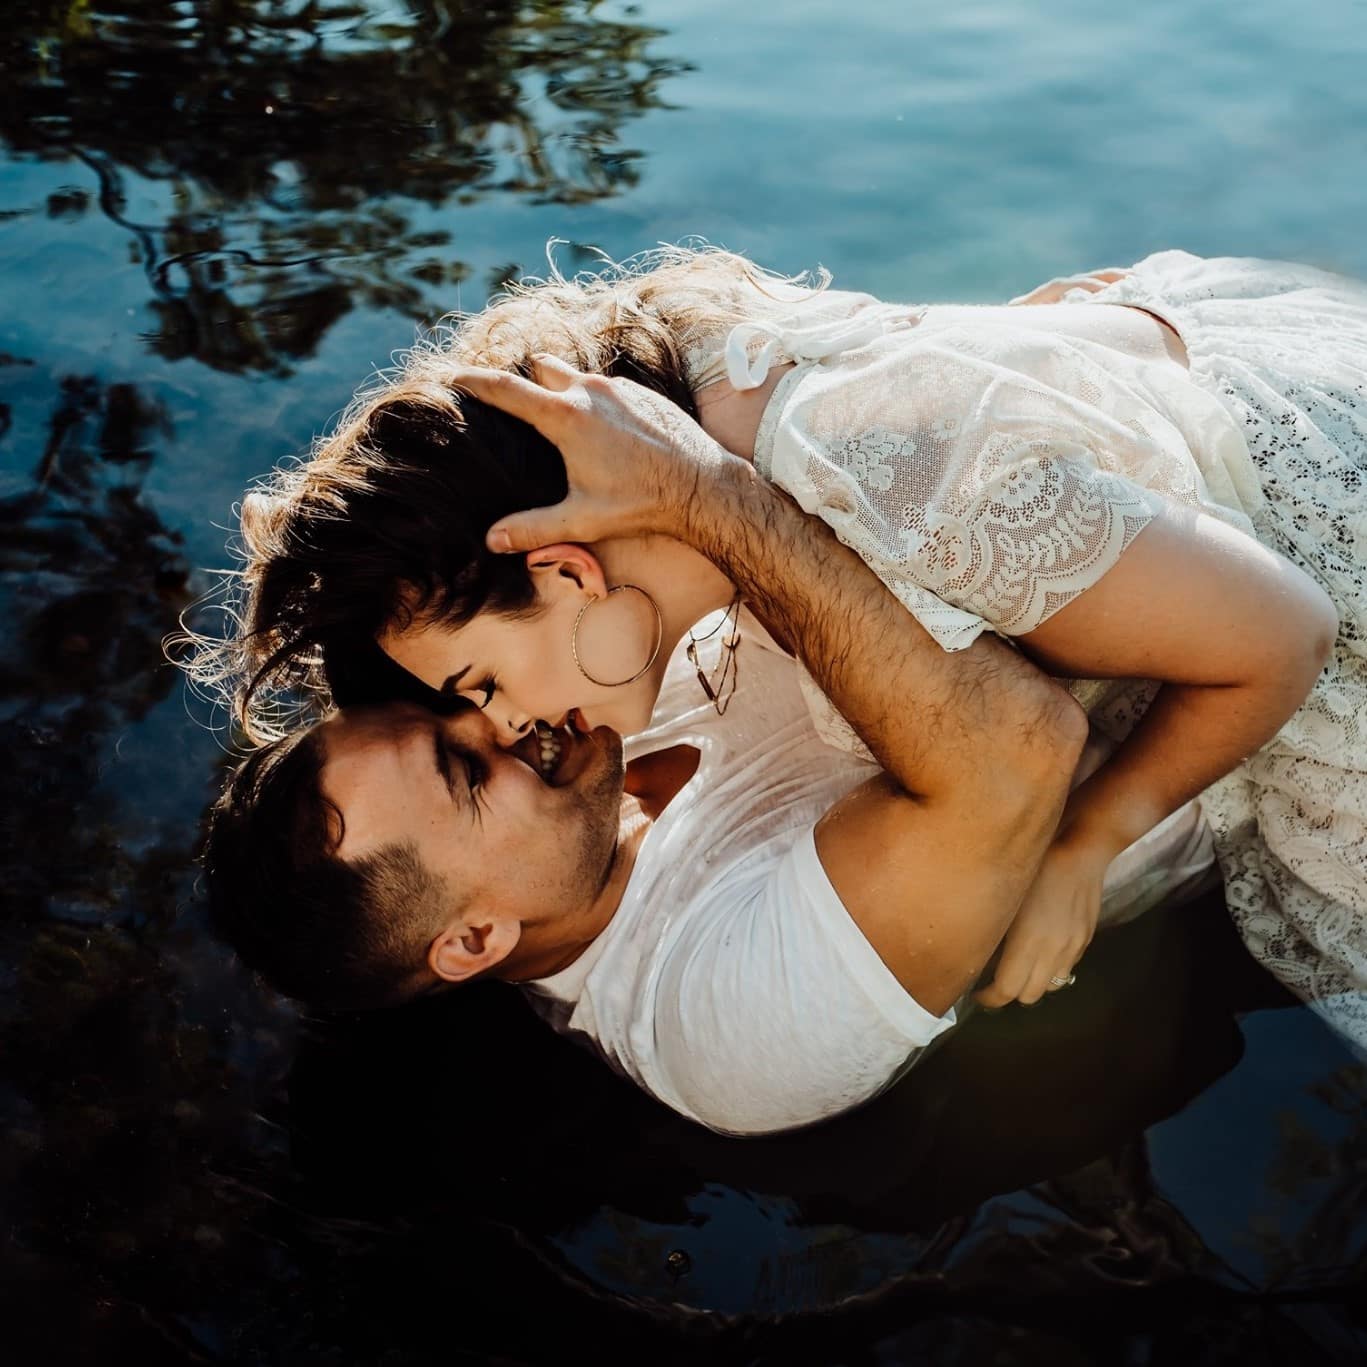 woman wearing white lace dress laying on man in water